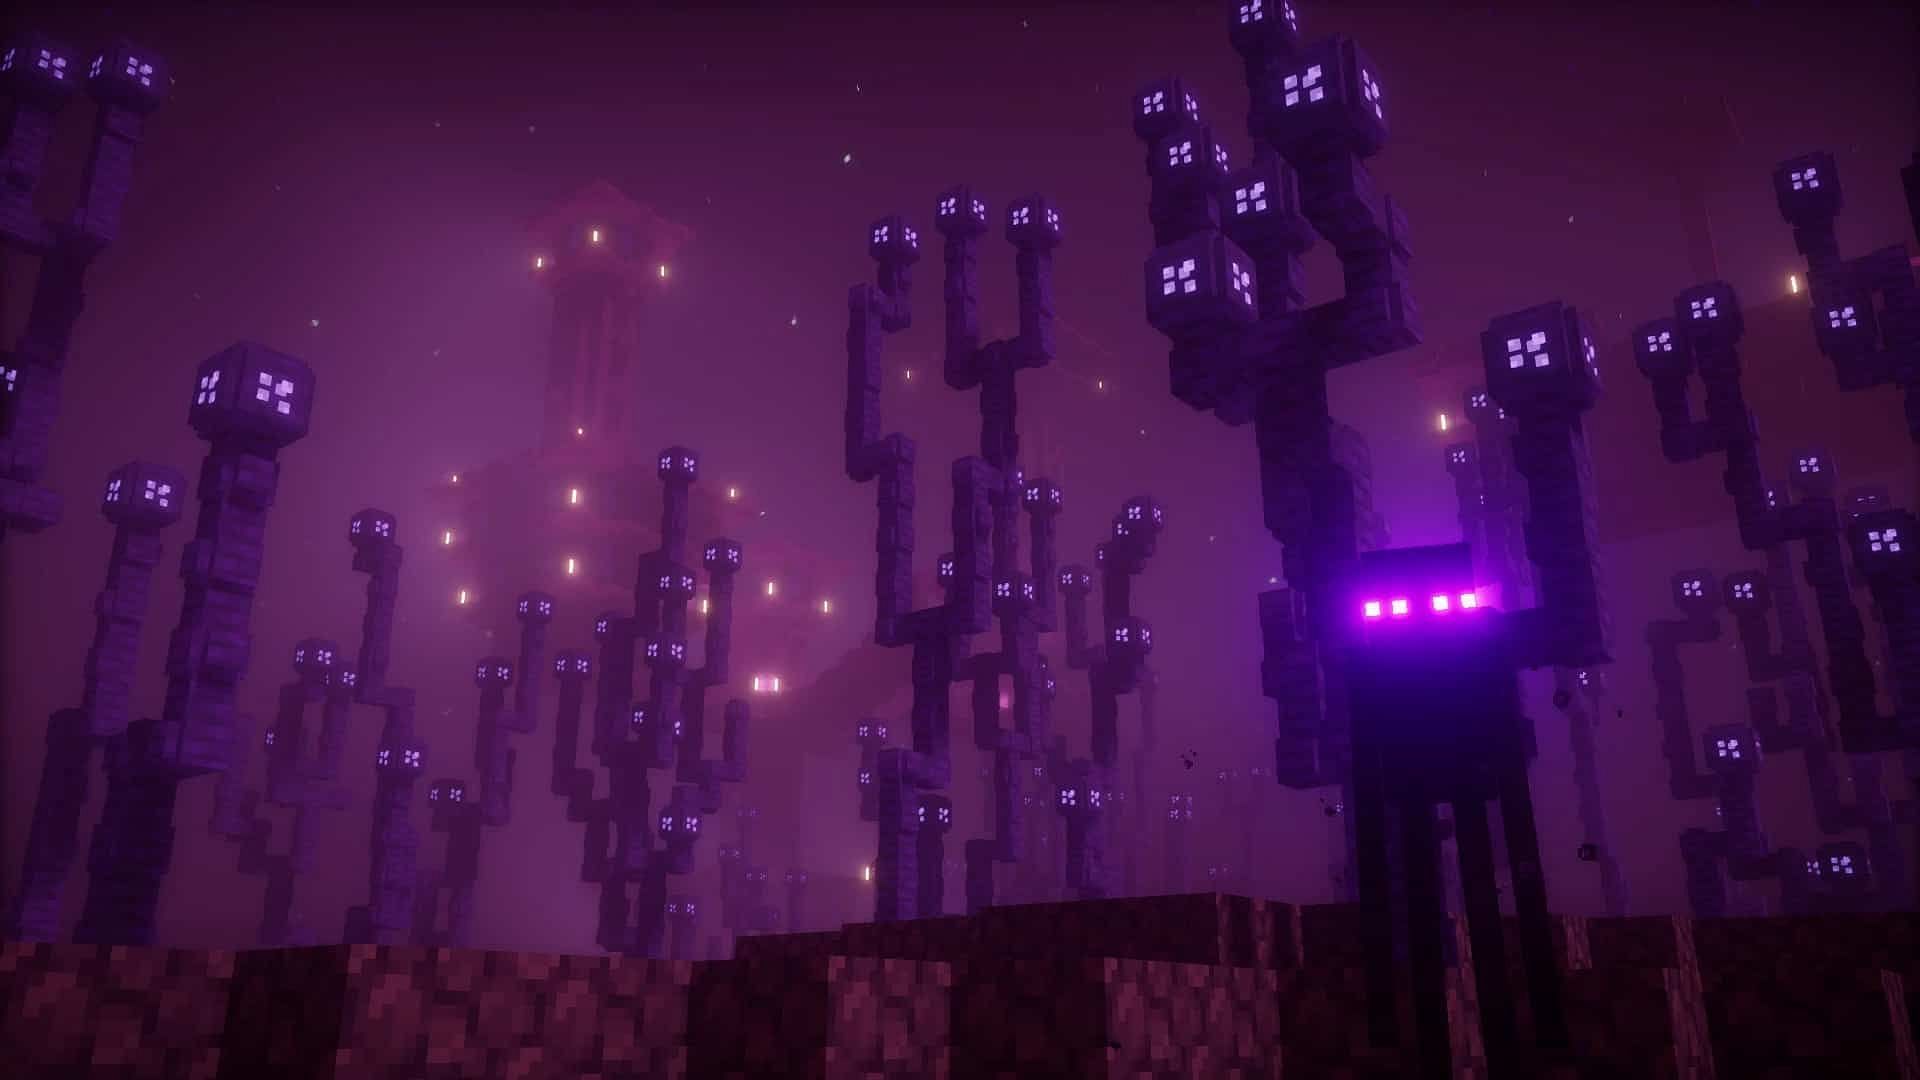 The End appears much more sinister in the Pixel Perfection texture pack (Image via Xssheep, Nova_Wostra/Resourcepack.net)